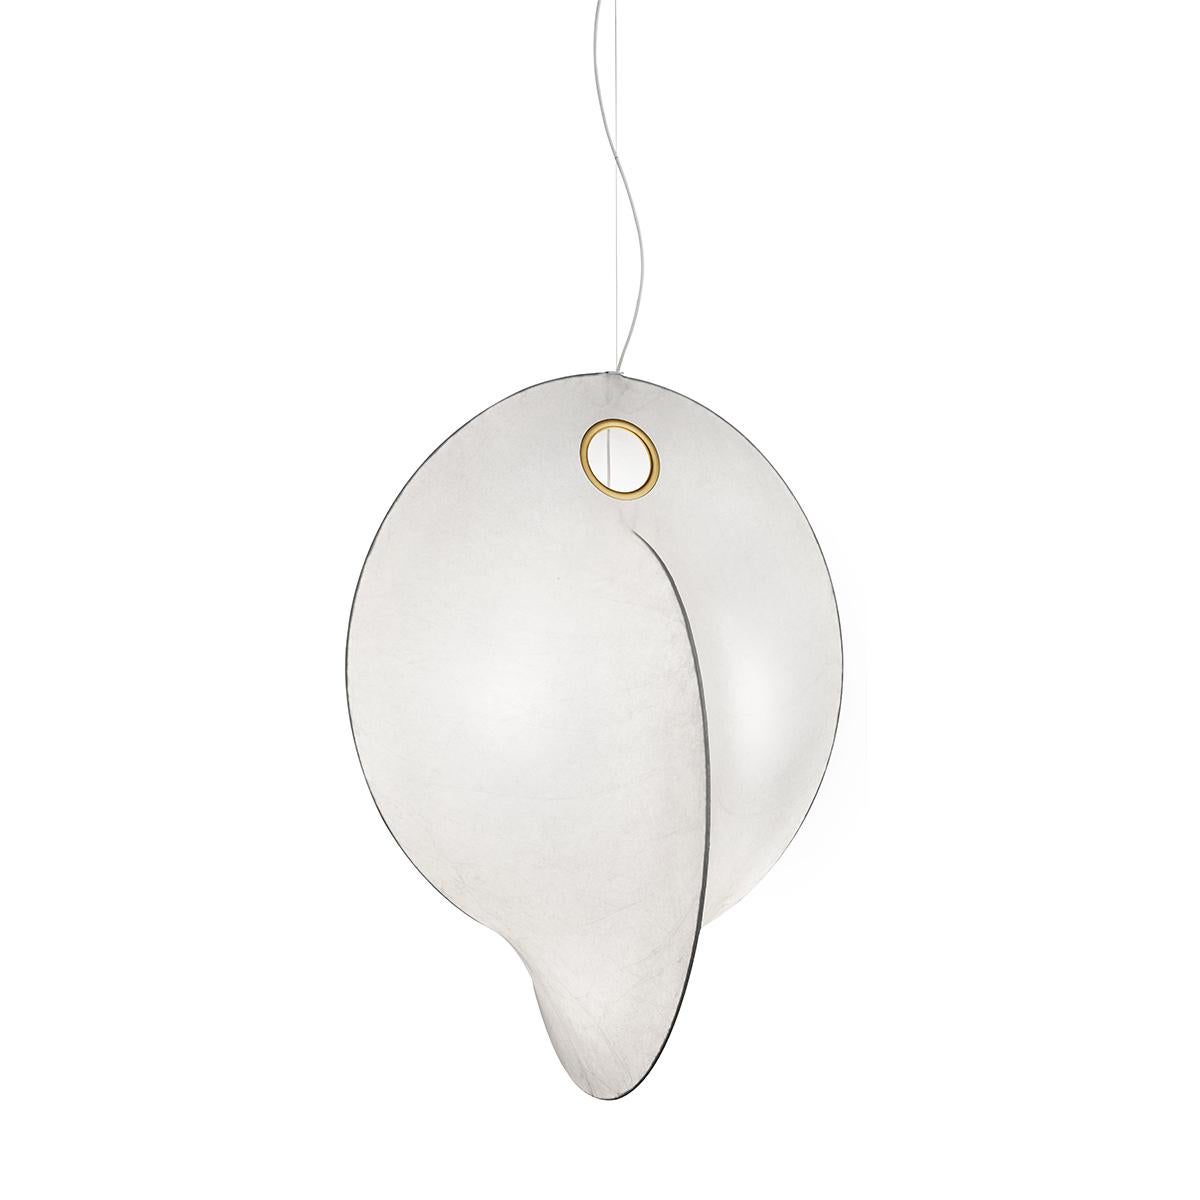 Overlap, a contemporary pendant lamp by Flos, is Michael Anastassiades’ tribute to the distinct cocoon wrapping technique that the Italian designer lighting company has won several hearts and awards with. This contemporary pendant light is made from